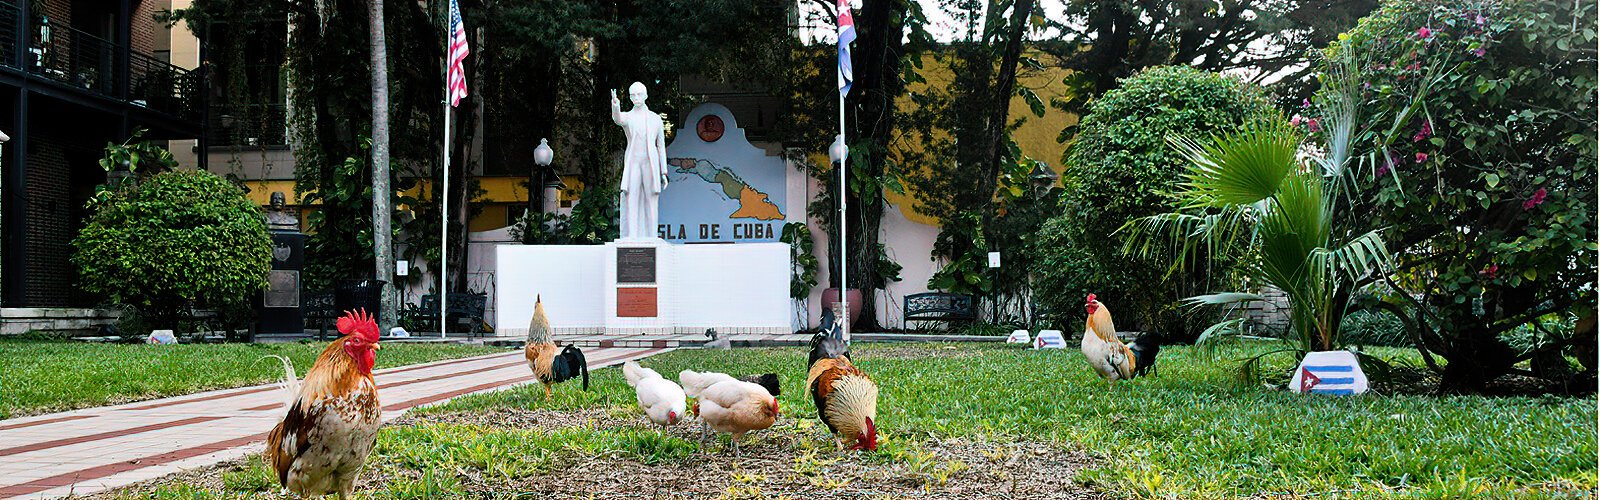 Roosters peck Cuban soil right in Ybor City at the Parque Amigos de Jose Marti (Friends of Jose Marti Park) which has belonged to the Republic of Cuba since 1956.